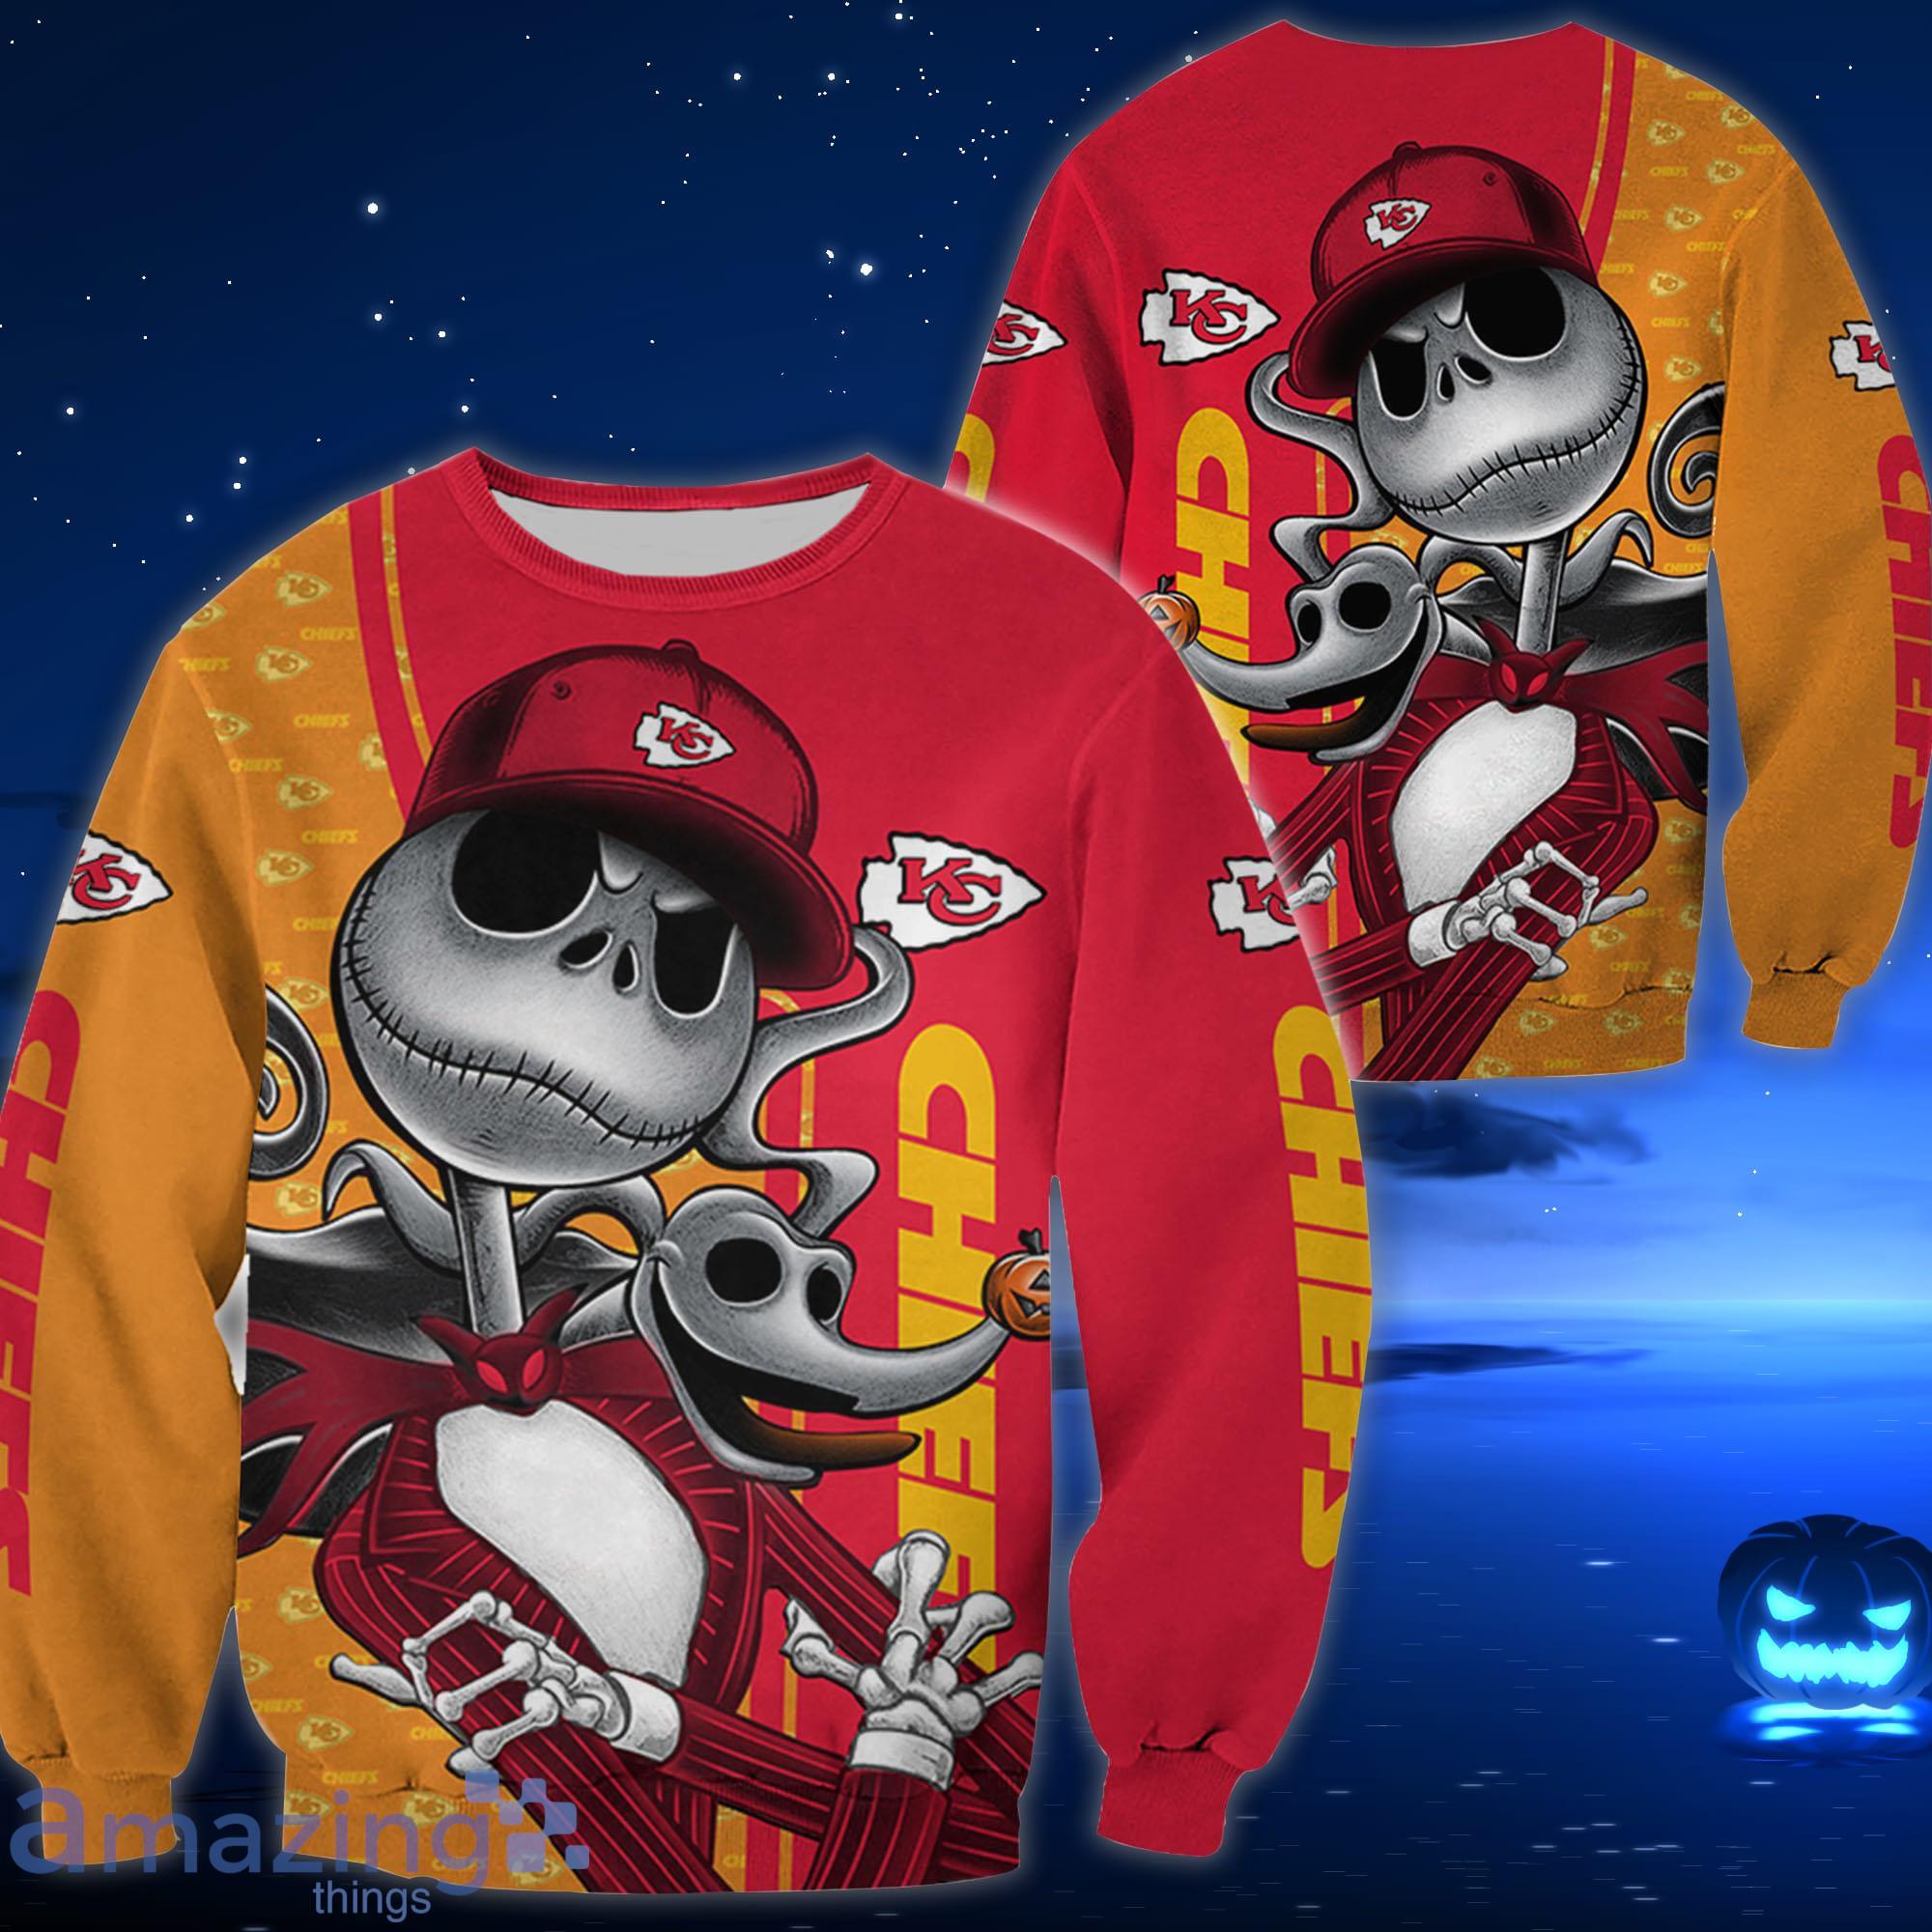 Kansas City Chief Jack Skellington All Over Printed 3D Shirt Halloween Gift For Fans